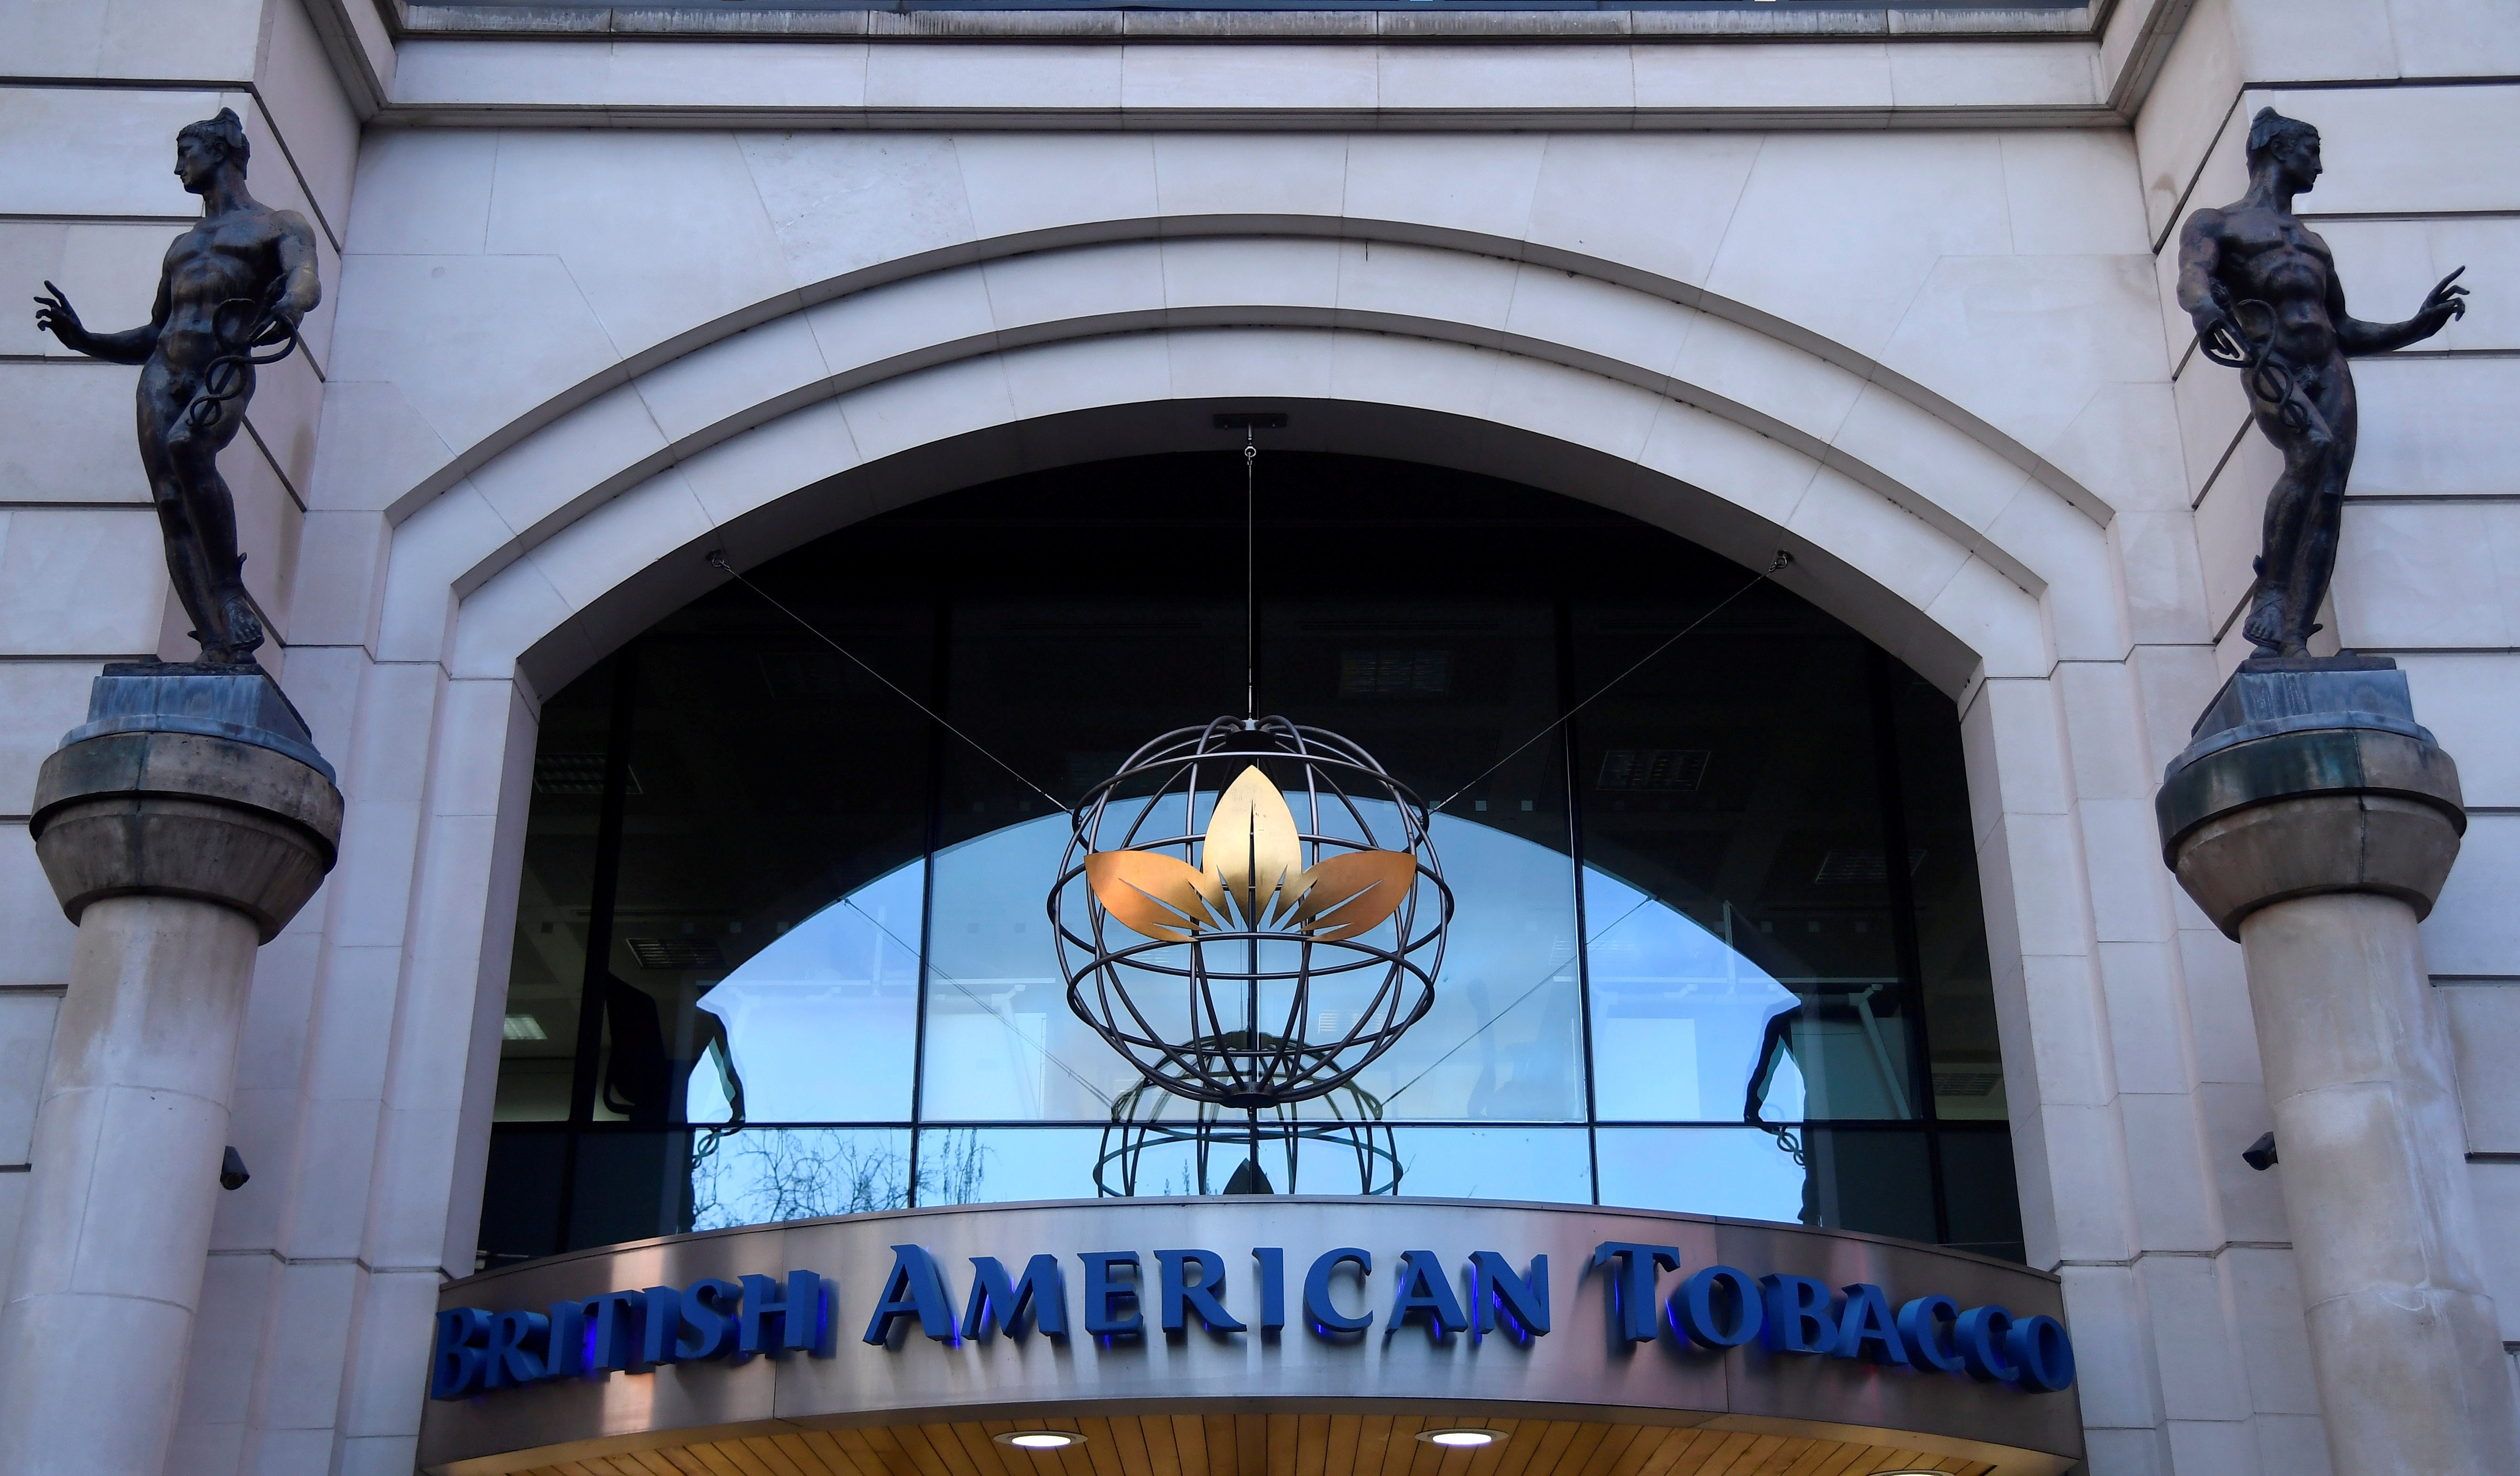 British American Tobacco’s offices in London